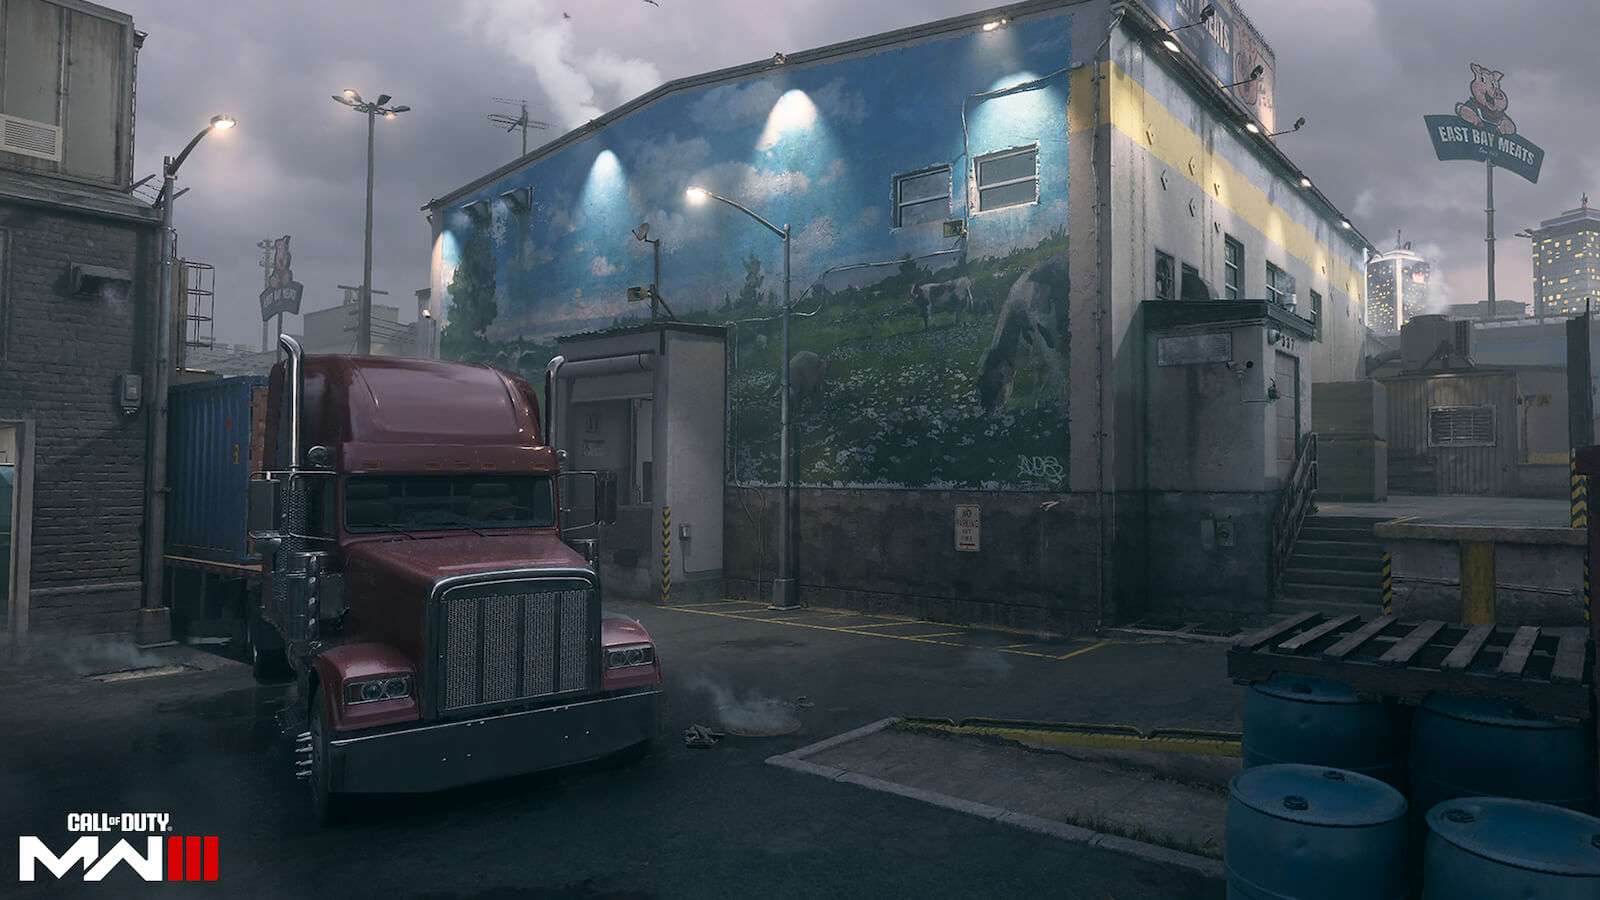 MW3 players claim maps like Rust have "rotted people's brains"